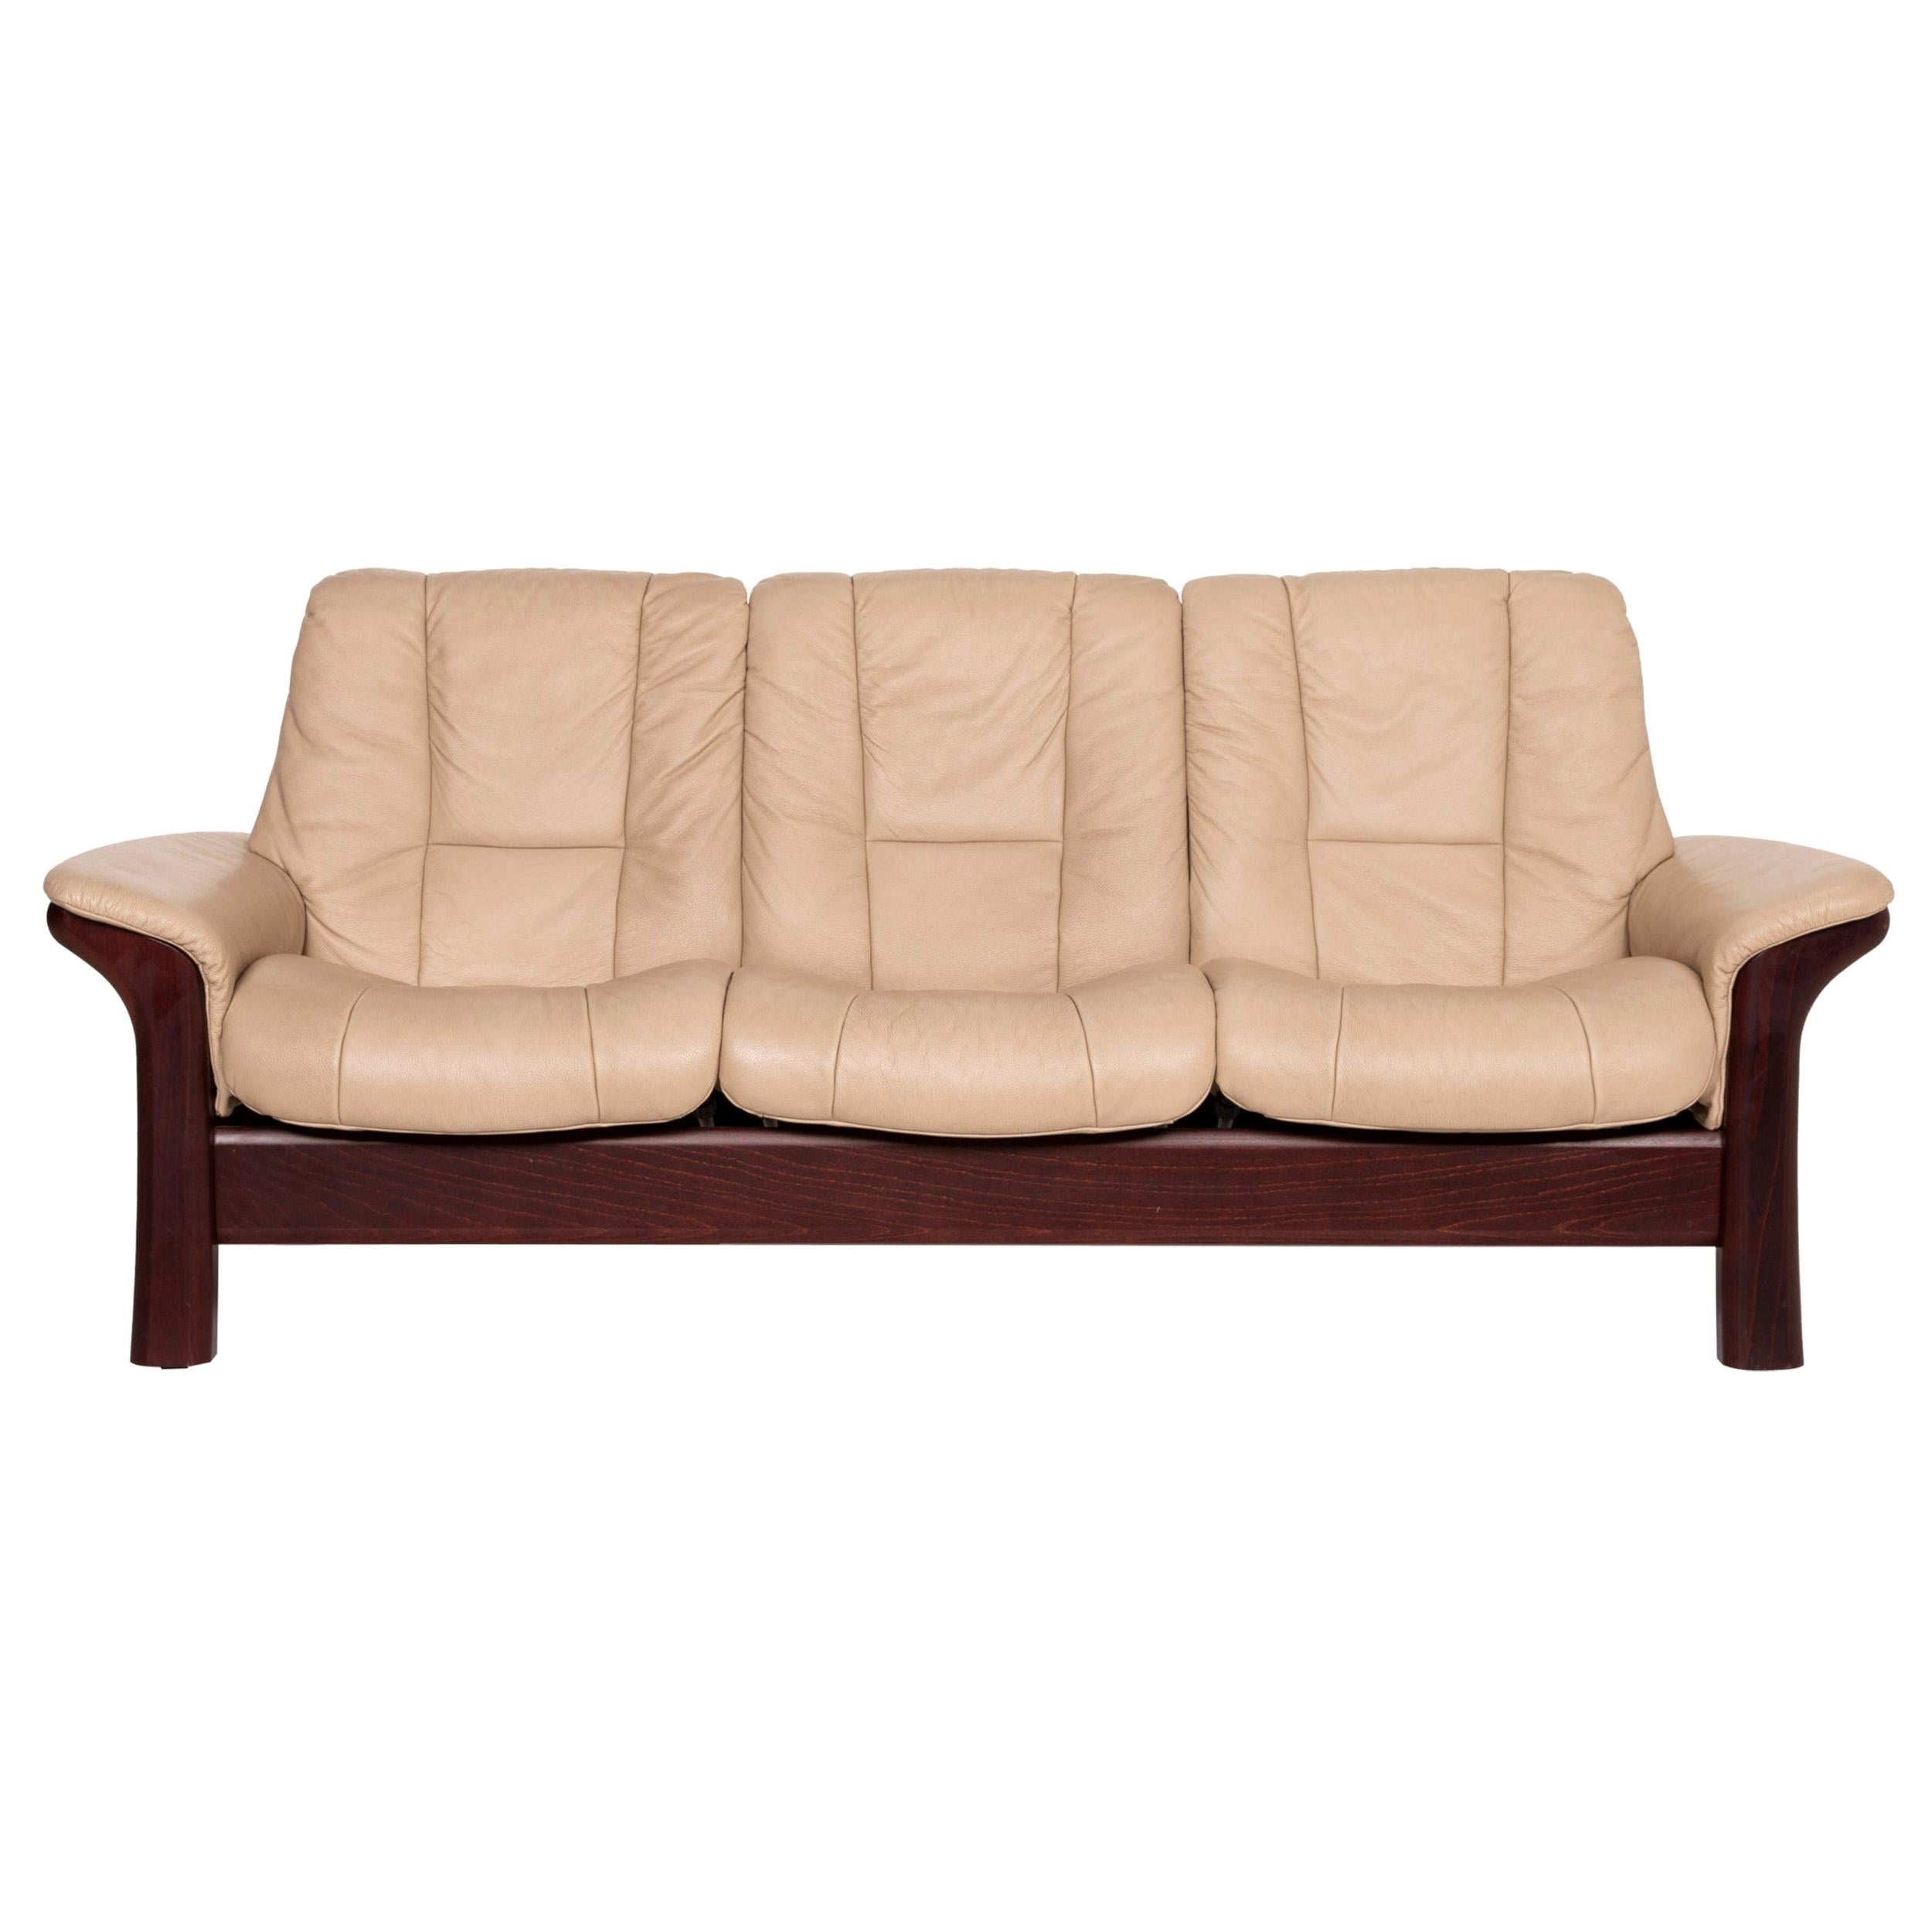 Stressless Windsor Leather Sofa Beige Three-Seater Relax Function